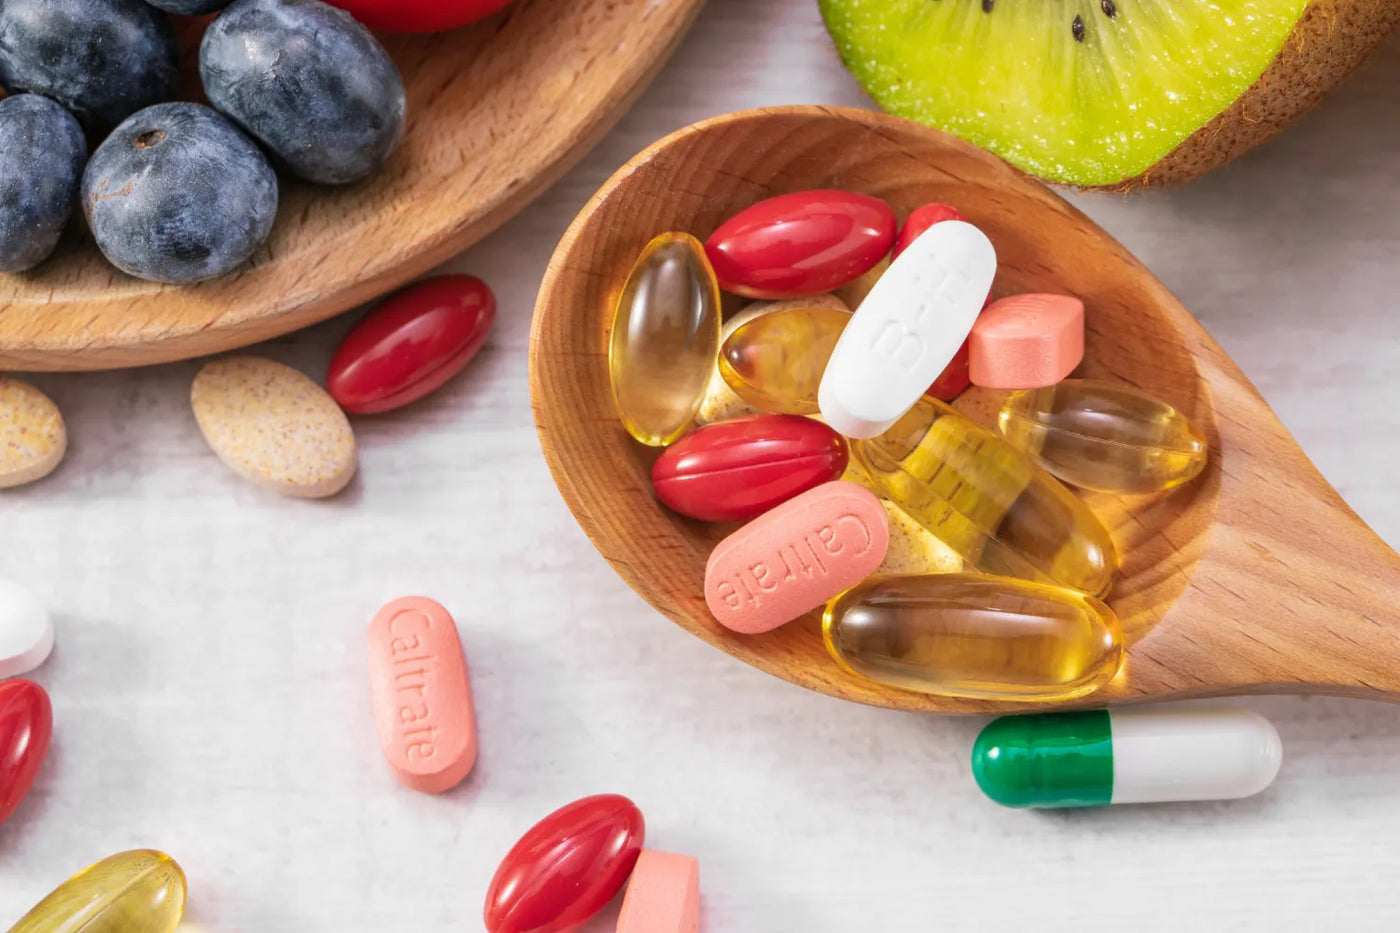 The Essential Guide to Choosing Health Supplements